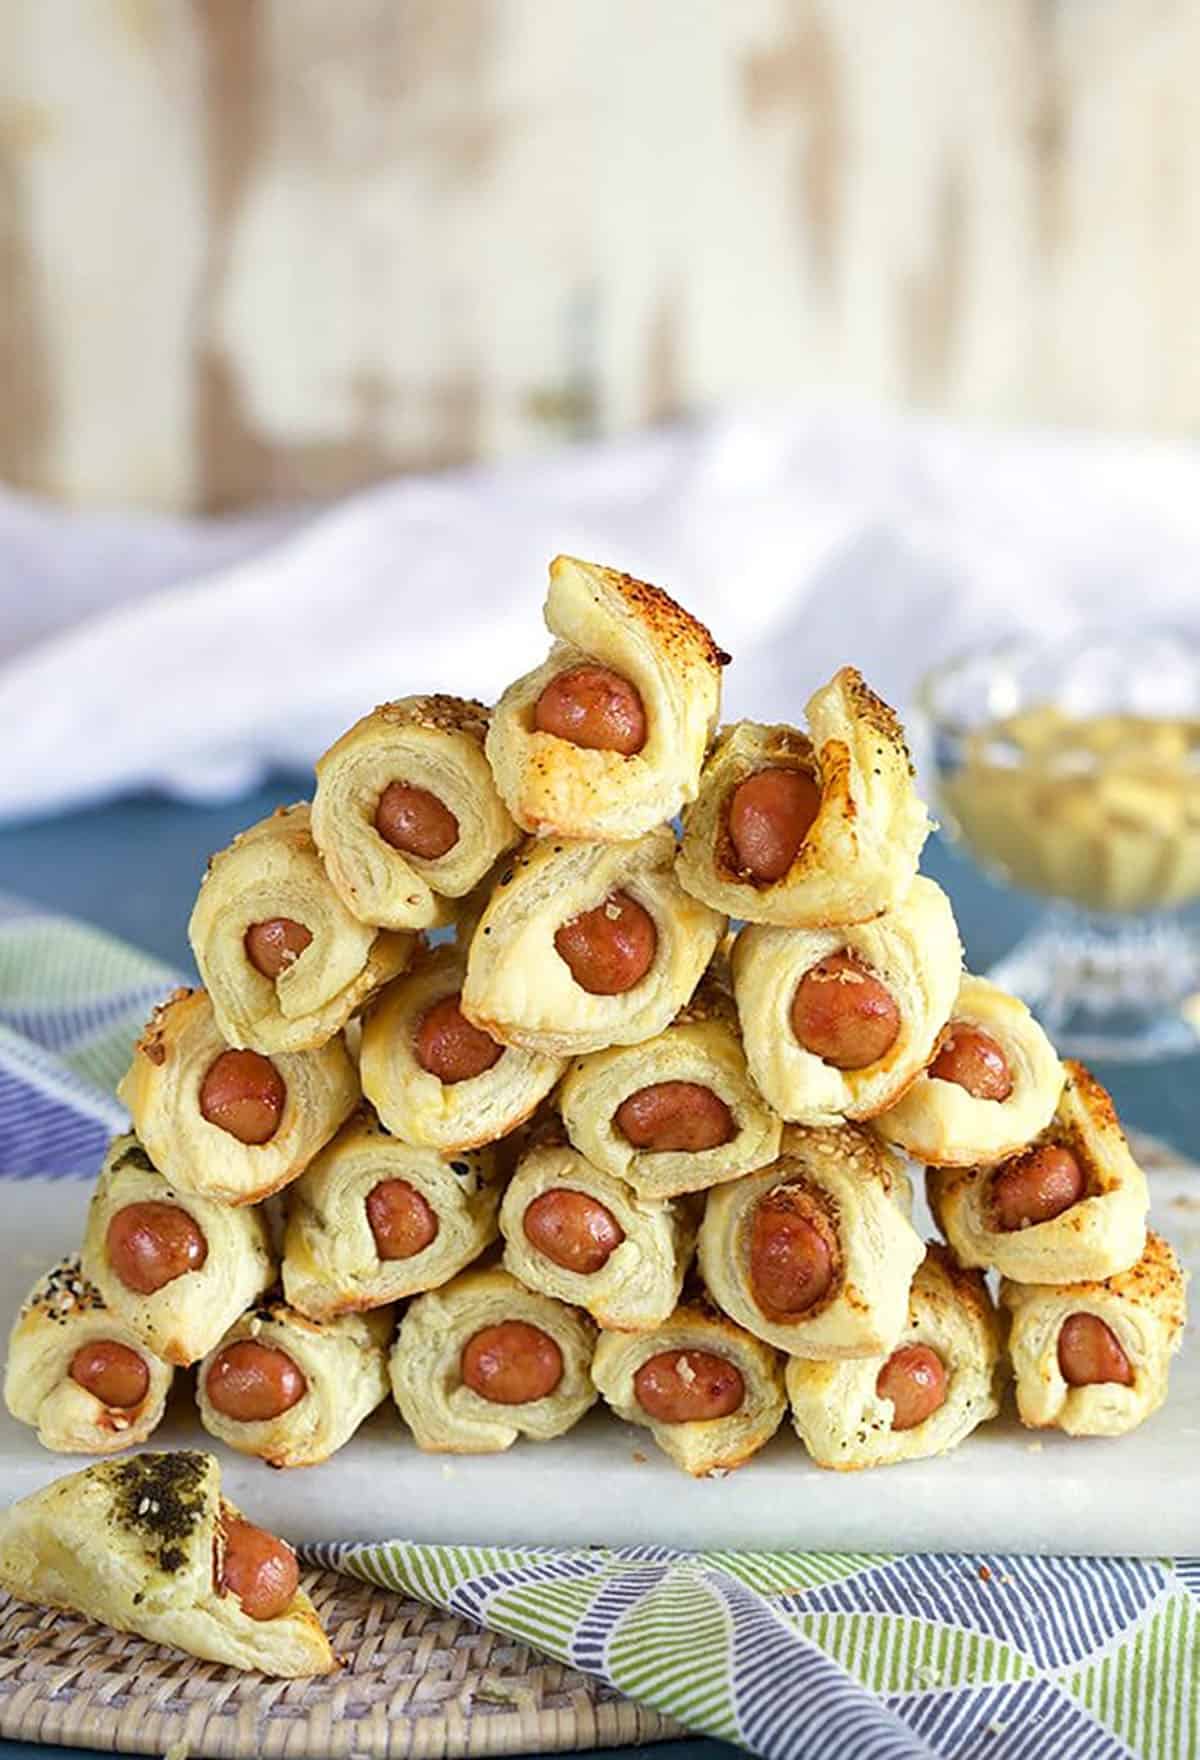 Pigs in a blanket piled in a pyrimad form on a marble tray.